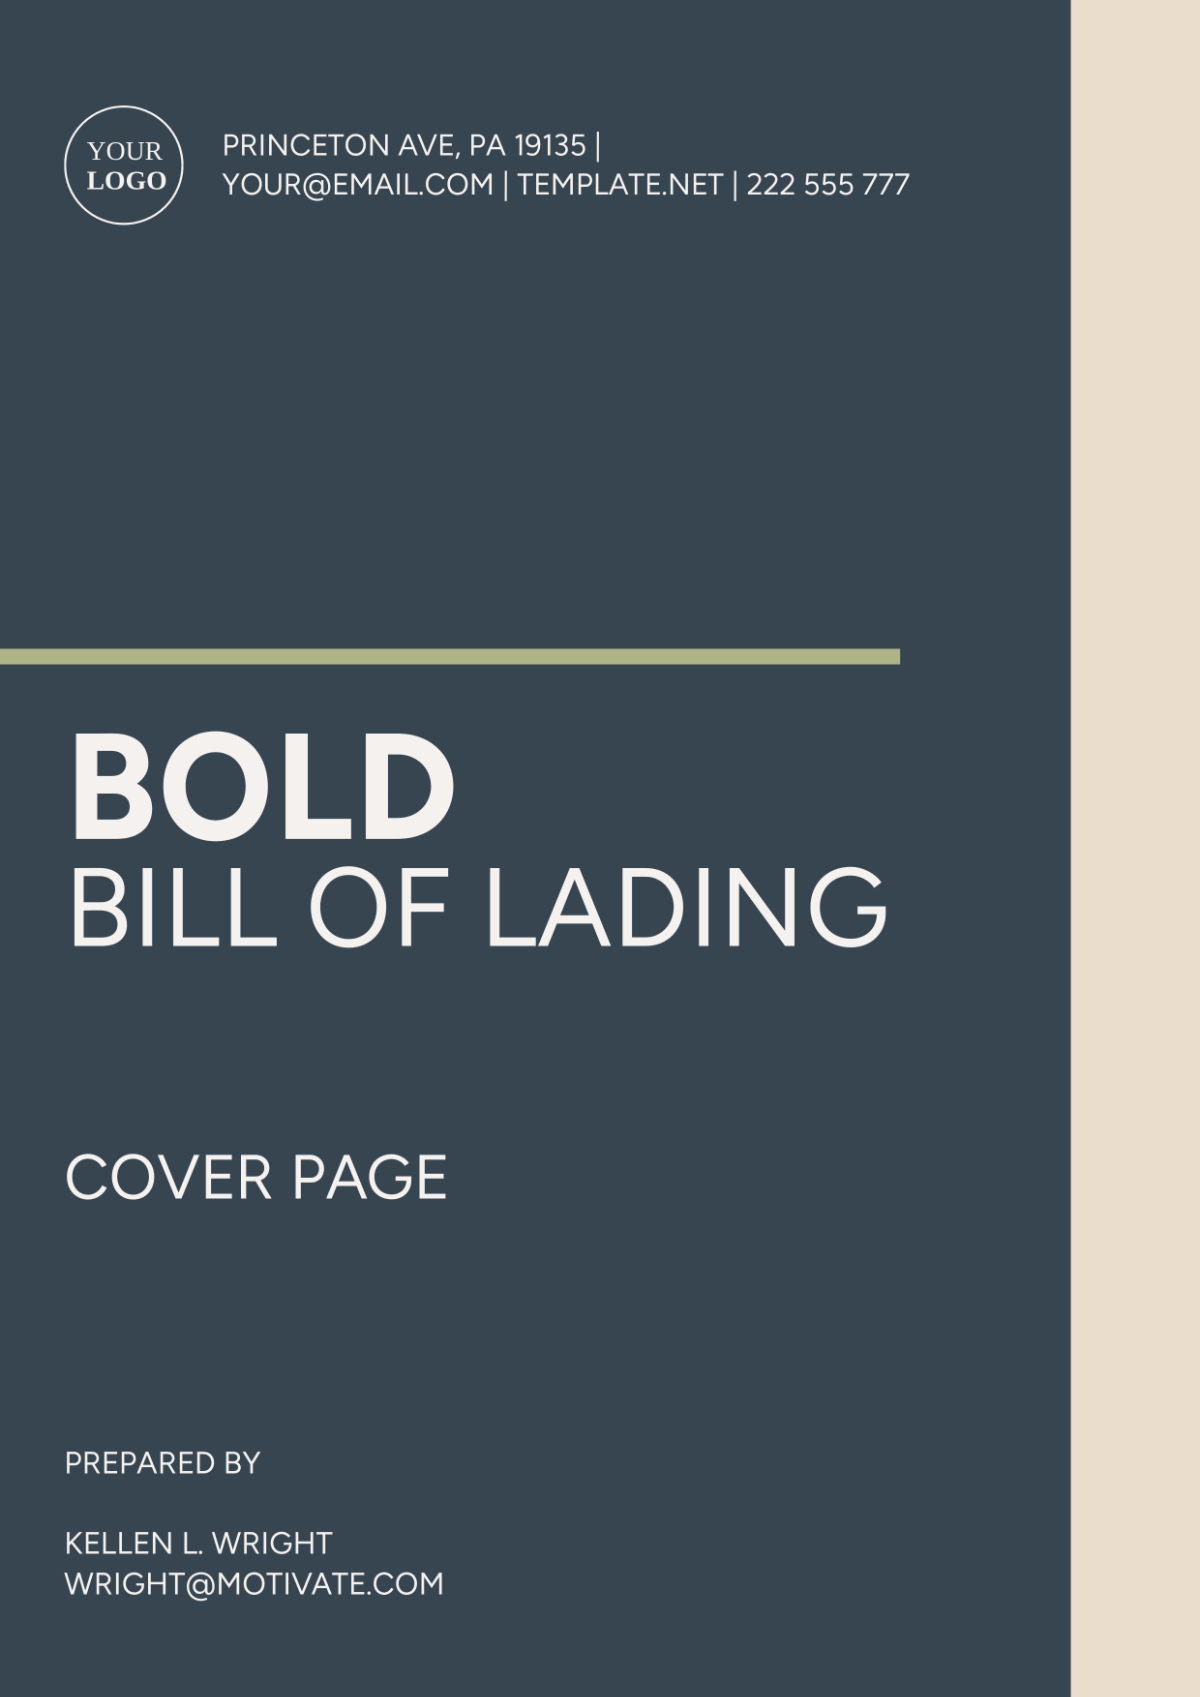 Bold Bill of Lading Cover Page Template